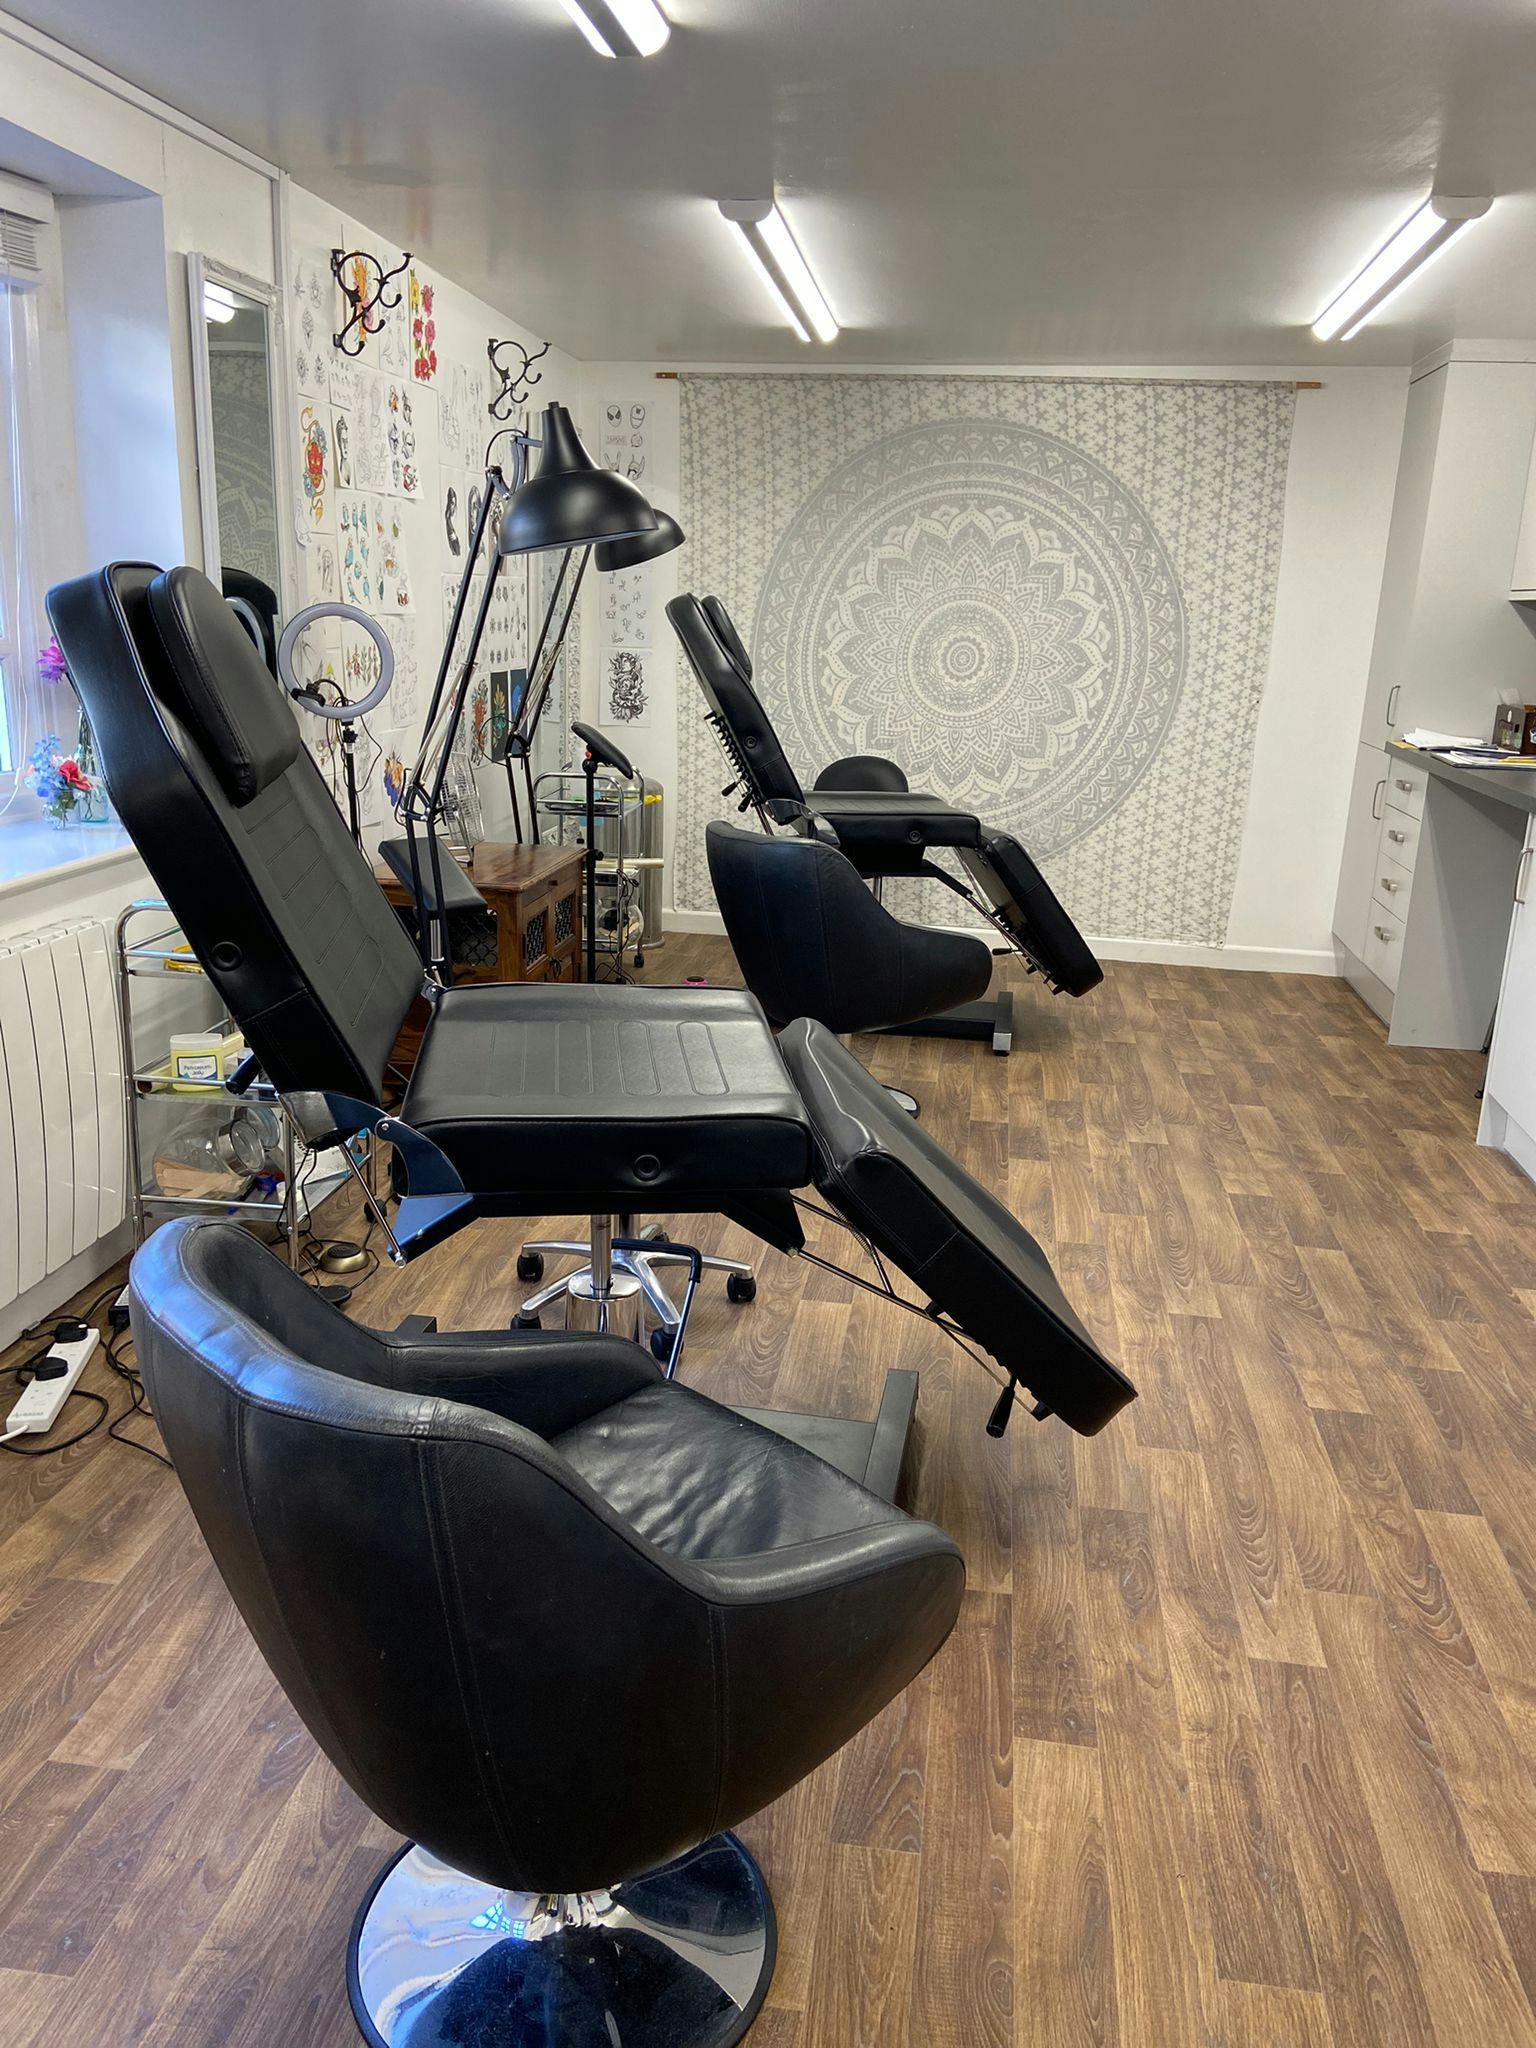 Picture of another tattoo station in Blackbird Tattoo Studio